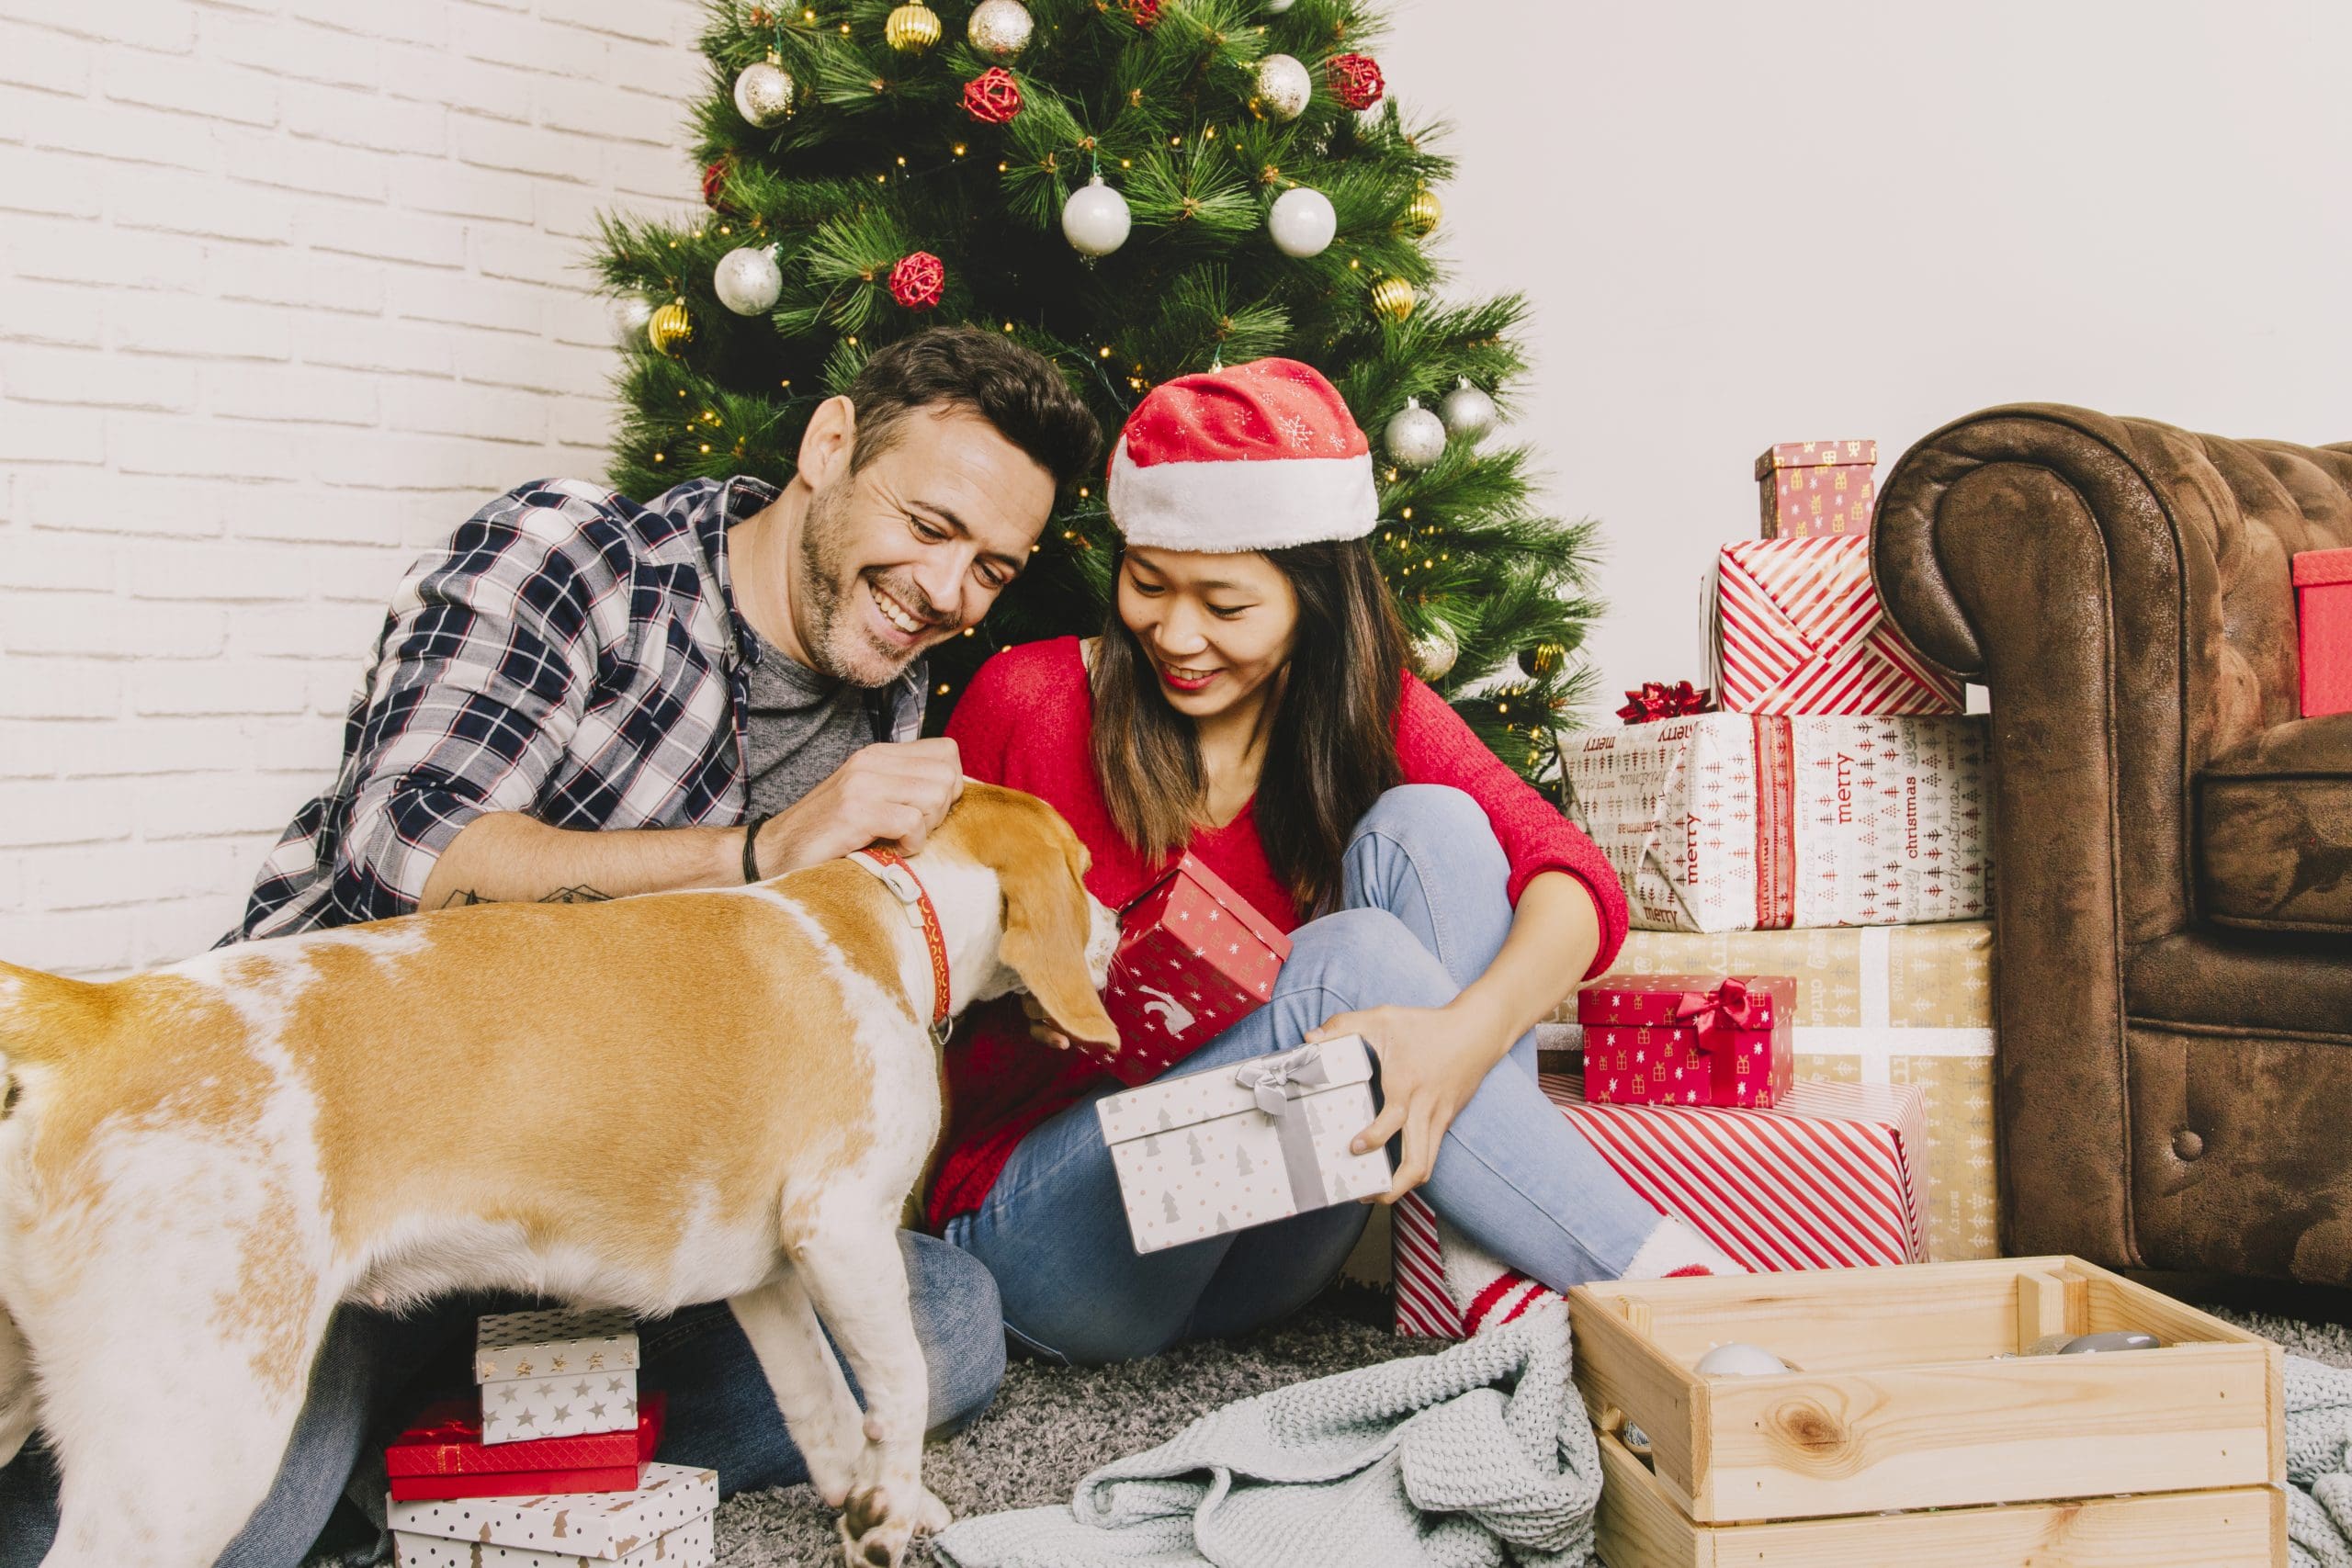 couple celebrating the holidays with dog giving them best holidays gifts for dogs